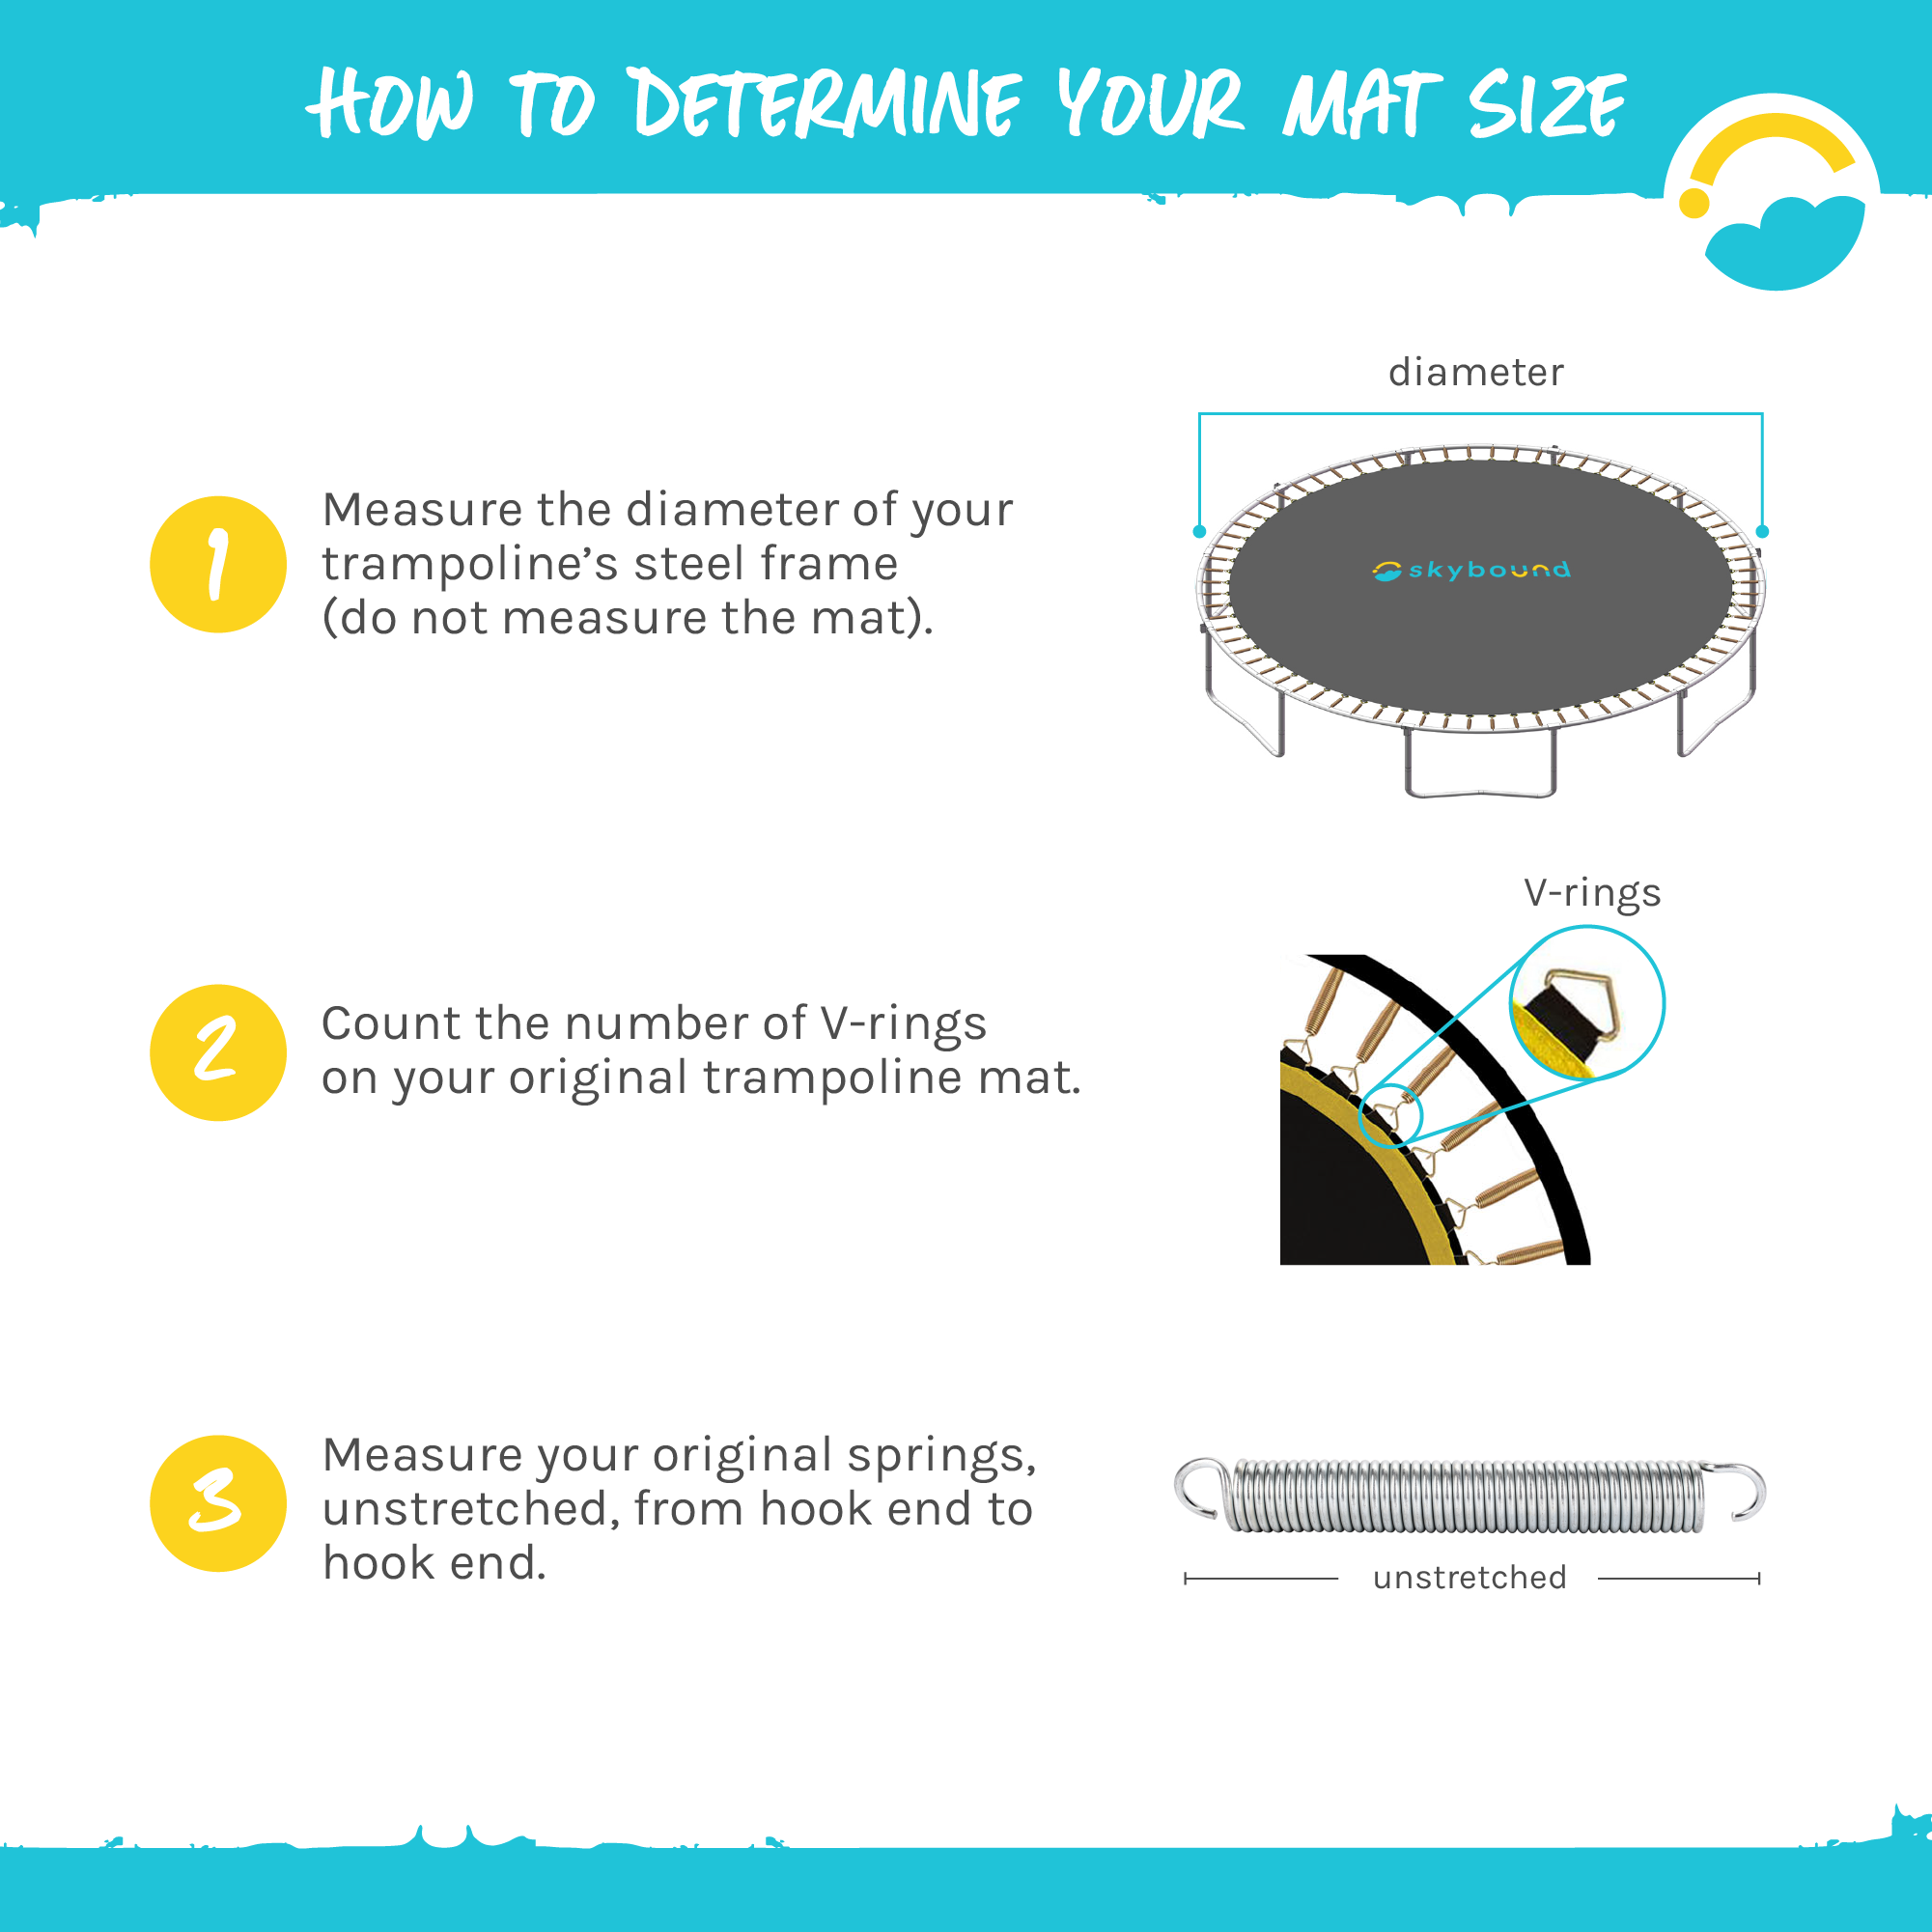 How to Determine your Mat Size: 1-Measure the diameter of your trampoline's steel frame (do no measure the mat). 2-Count the number of v-rings on your original trampoline mat. 3-Measure your original springs, upstretched, from hook-end to hook-end.